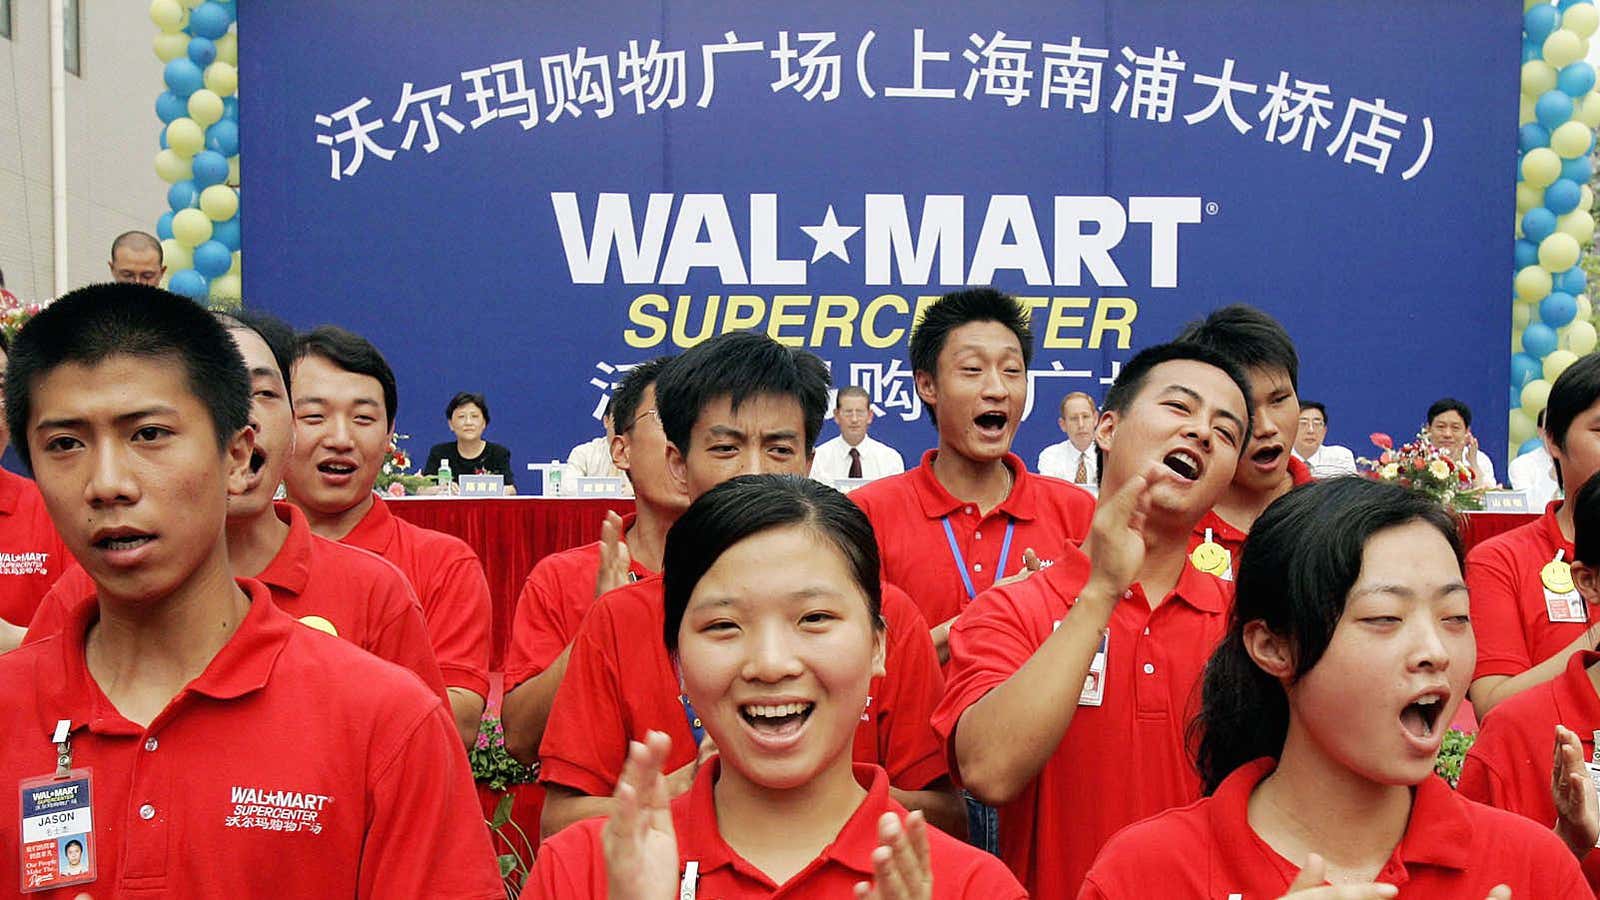 Workers at a 2005 Walmart opening event in Shanghai.